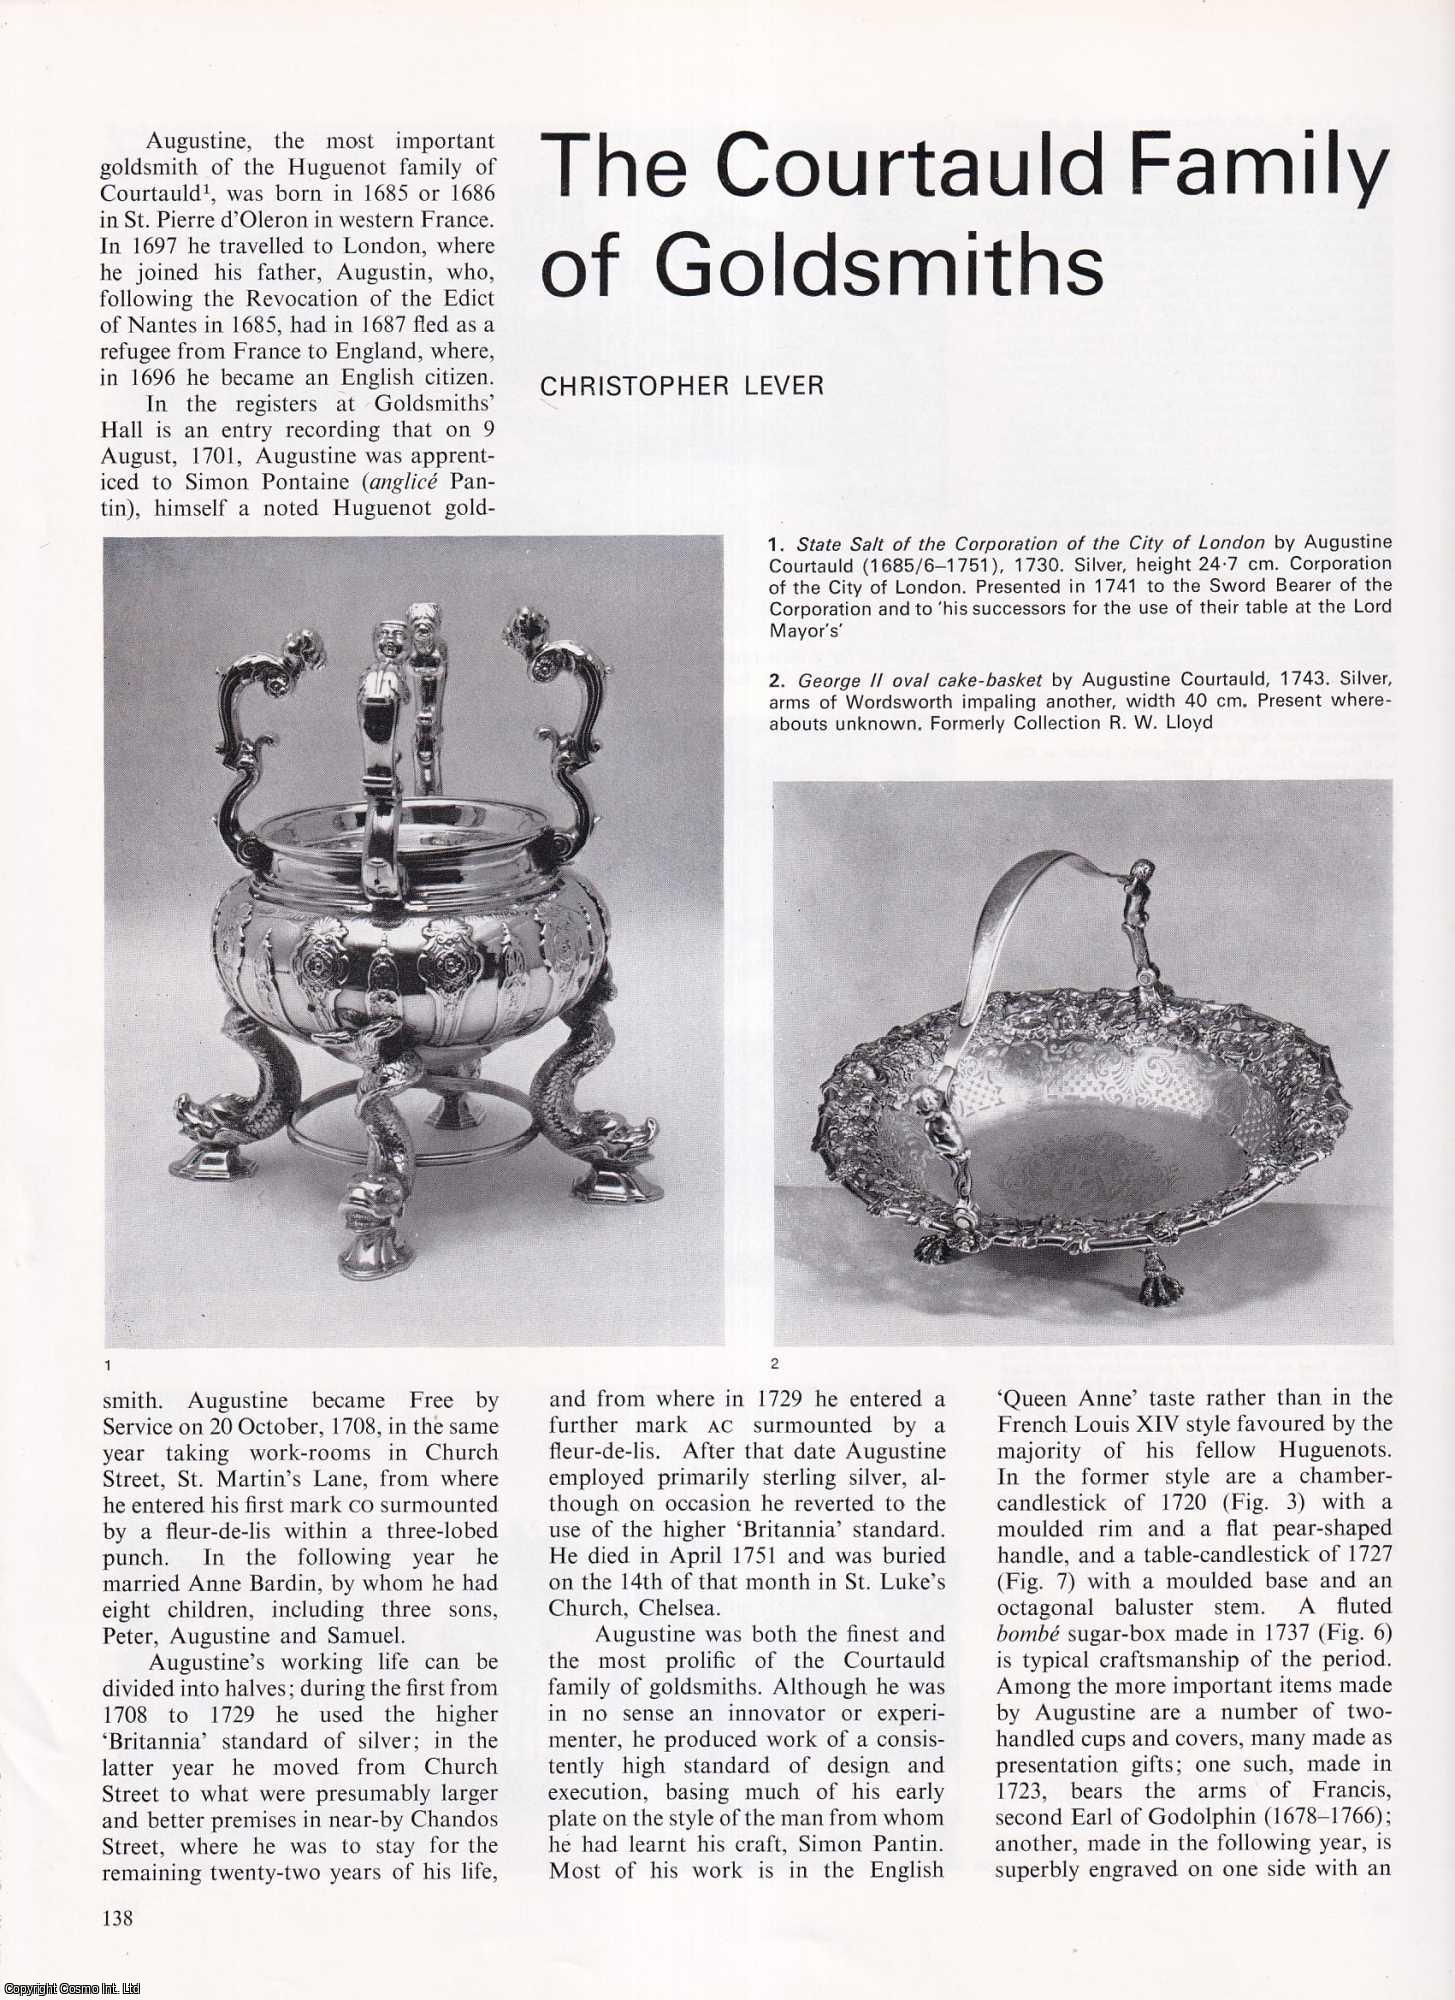 Christopher Lever - The Courtauld Family of Goldsmiths. An original article from Apollo, International Magazine of the Arts, 1974.